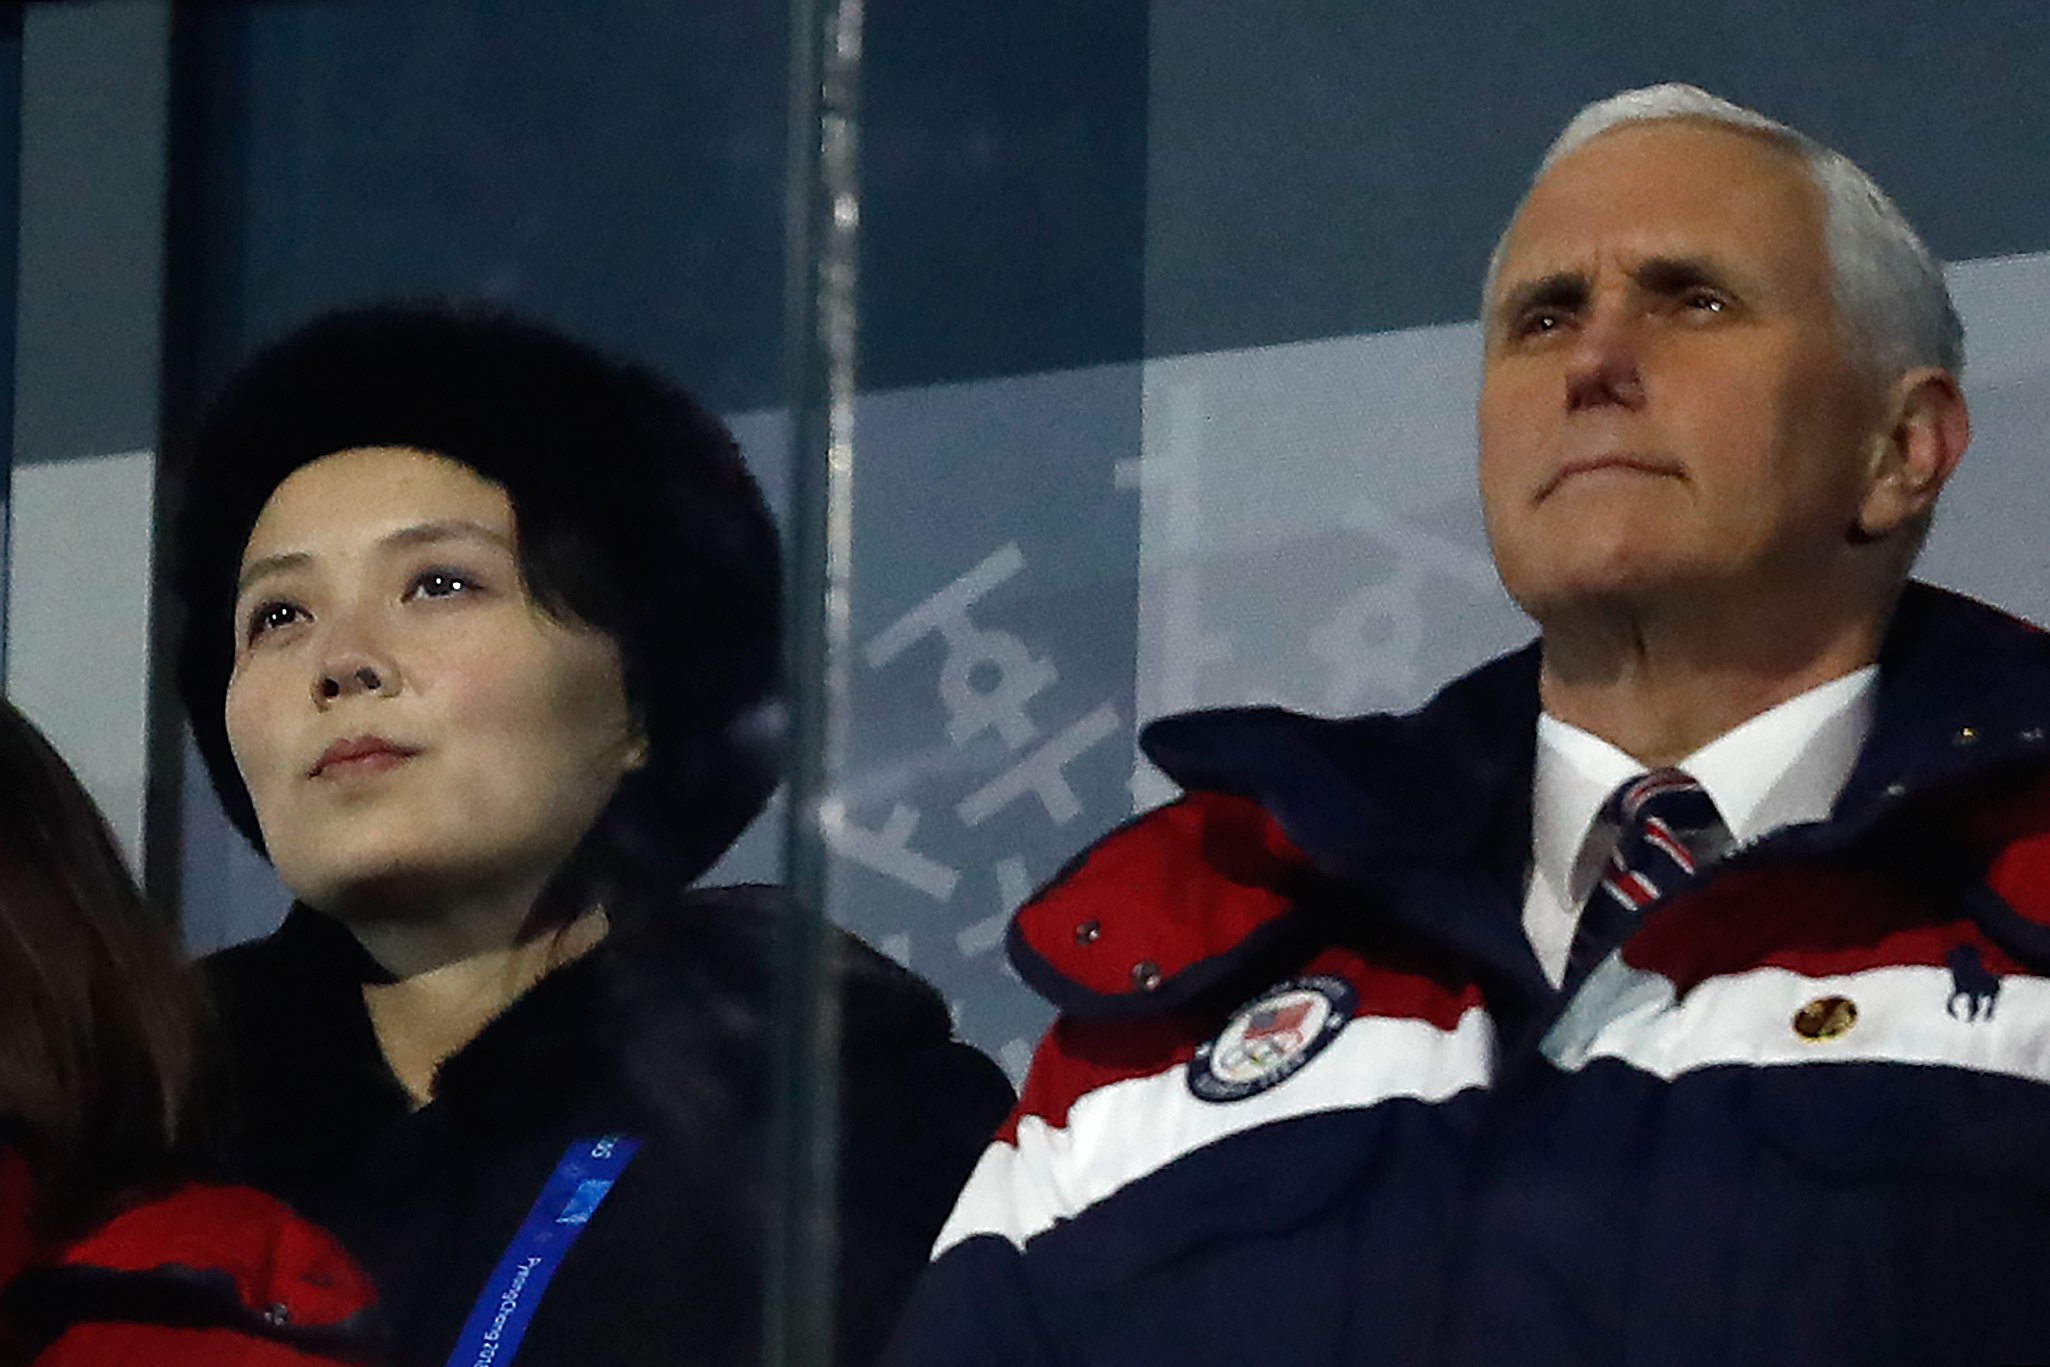  US Vice President Mike Pence (R) and North Korea's Kim Jong Uns sister Kim Yo Jong attend the opening ceremony of the Pyeongchang 2018 Winter Olympic Games at the Pyeongchang Stadium on February 9, 2018. (PHOTO / ODD ANDERSEN/AFP/Getty Images)